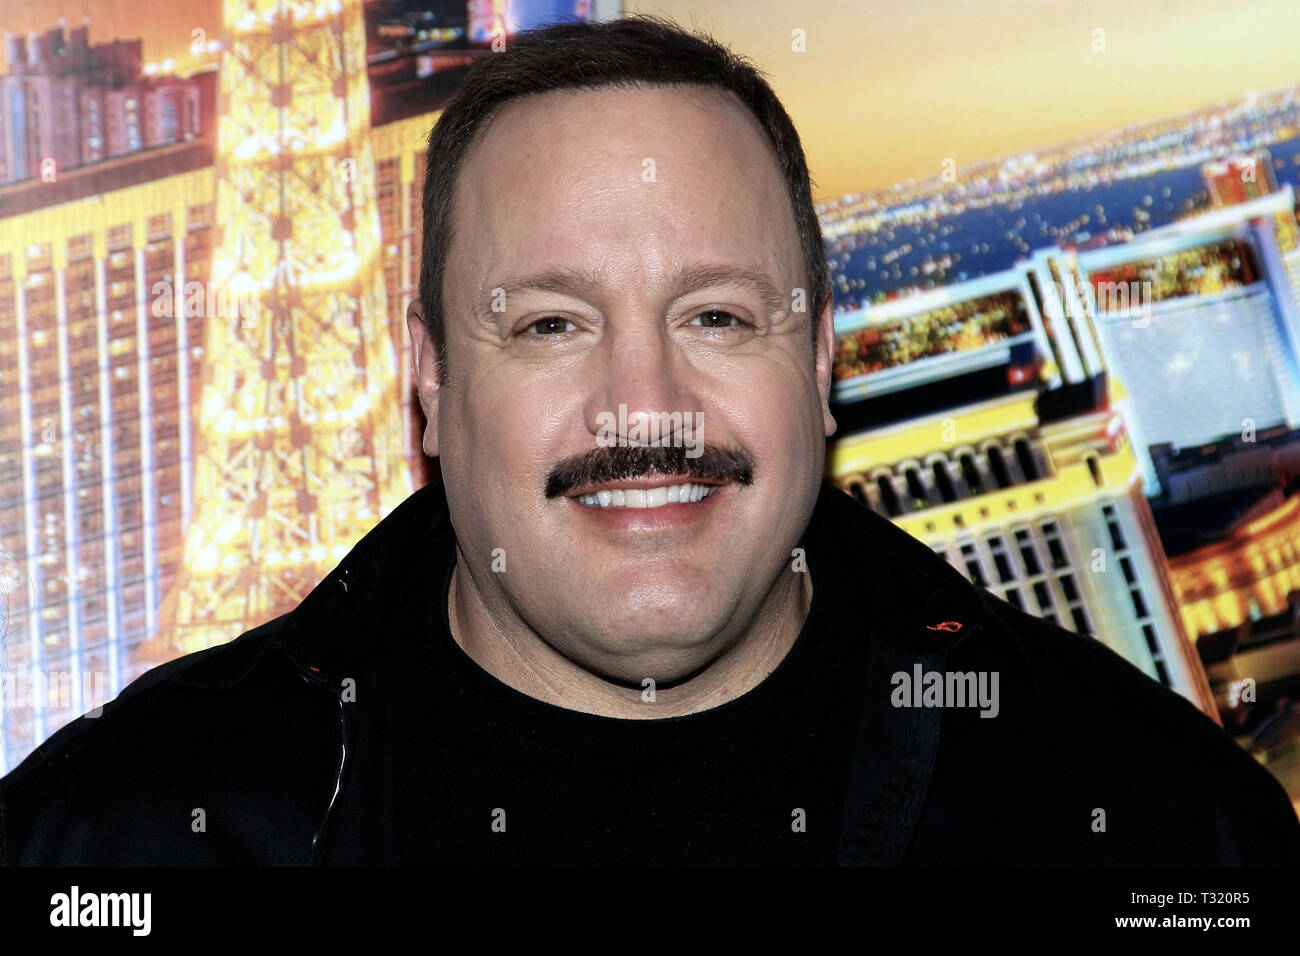 New York, USA. 13 Apr, 2015.  Actor, Kevin James at The Moms 'Paul Blart: Mall Cop 2' Screening at AMC Loews Lincoln Square 13 on April 13, 2015 in New York, NY . Credit: Steve Mack/S.D. Mack Pictures/Alamy Stock Photo